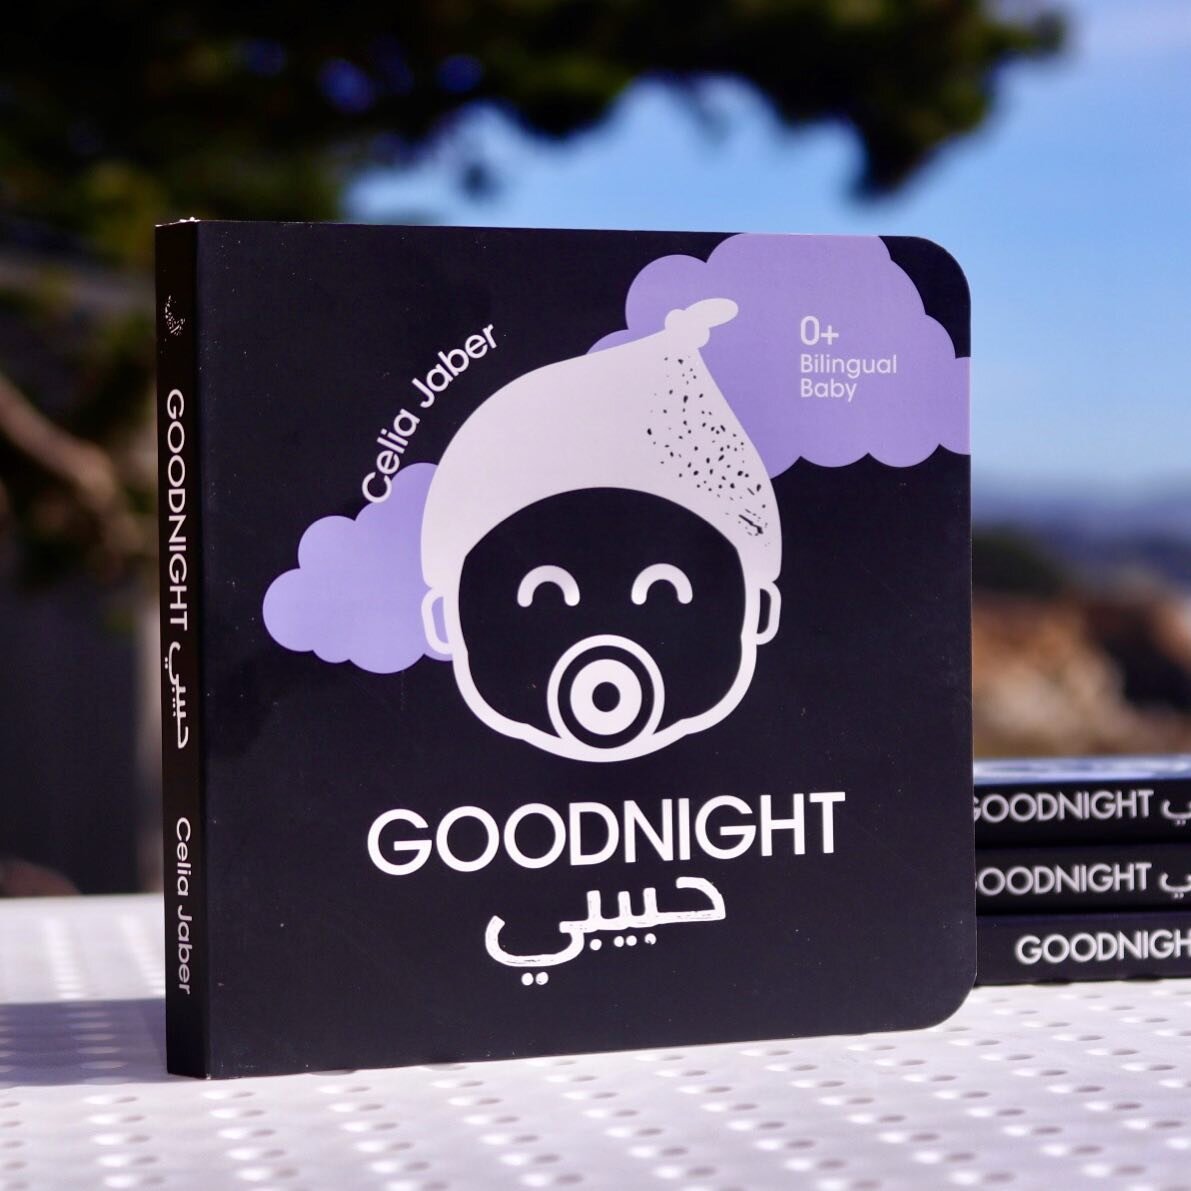 Goodnight Habibi is almost sold out on our website! 💜 A few are left in the Bundle set if you wanna get ahead of your gifting. 

Meanwhile, a second order of printing is in the works and will be back in the market in December. 🦌

Thank you everyone